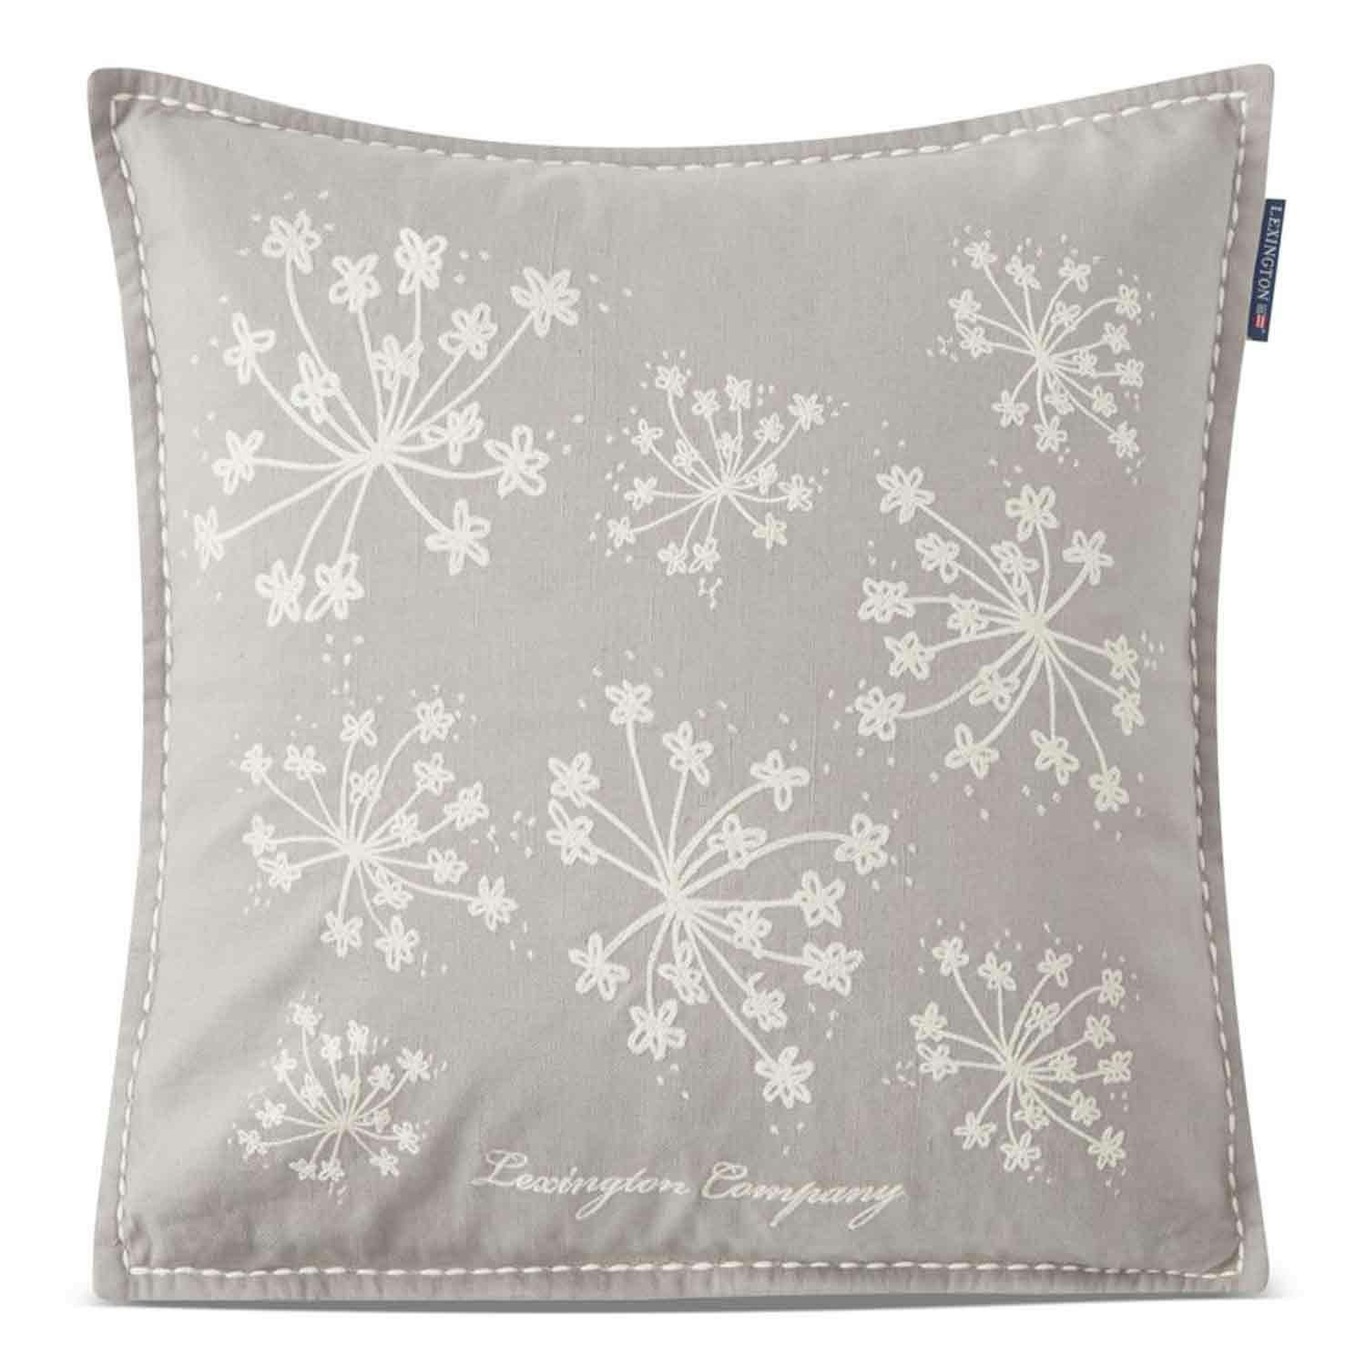 Flower Embroidered Cushion Cover, 50x50 cm